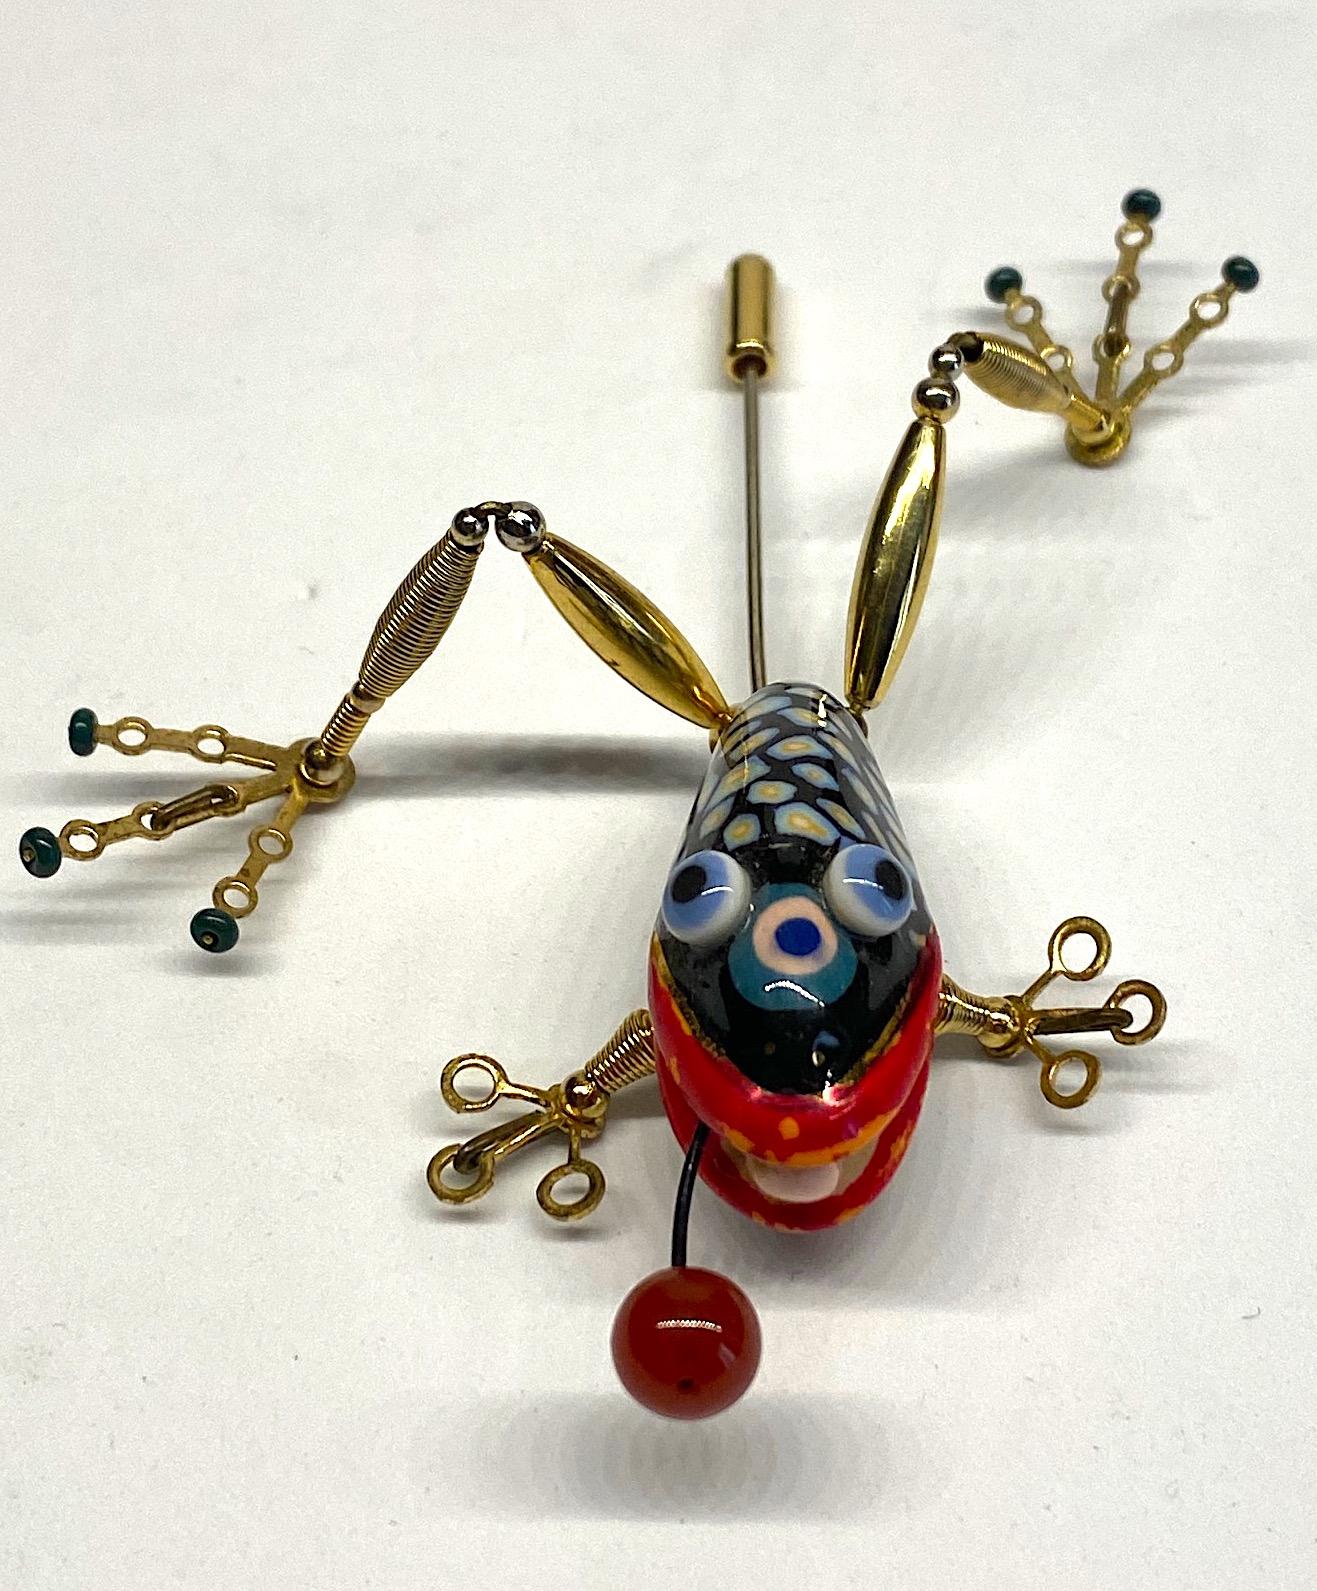 A one of kind hand made frog brooch from the company Jewelry 10. Always with a sense of whimsy, Jewelry 10 pieces designed by Cynthia Chuang and her husband Erh-Ping Tsai are highly collected and displayed. The frog porcelain body is meticulously